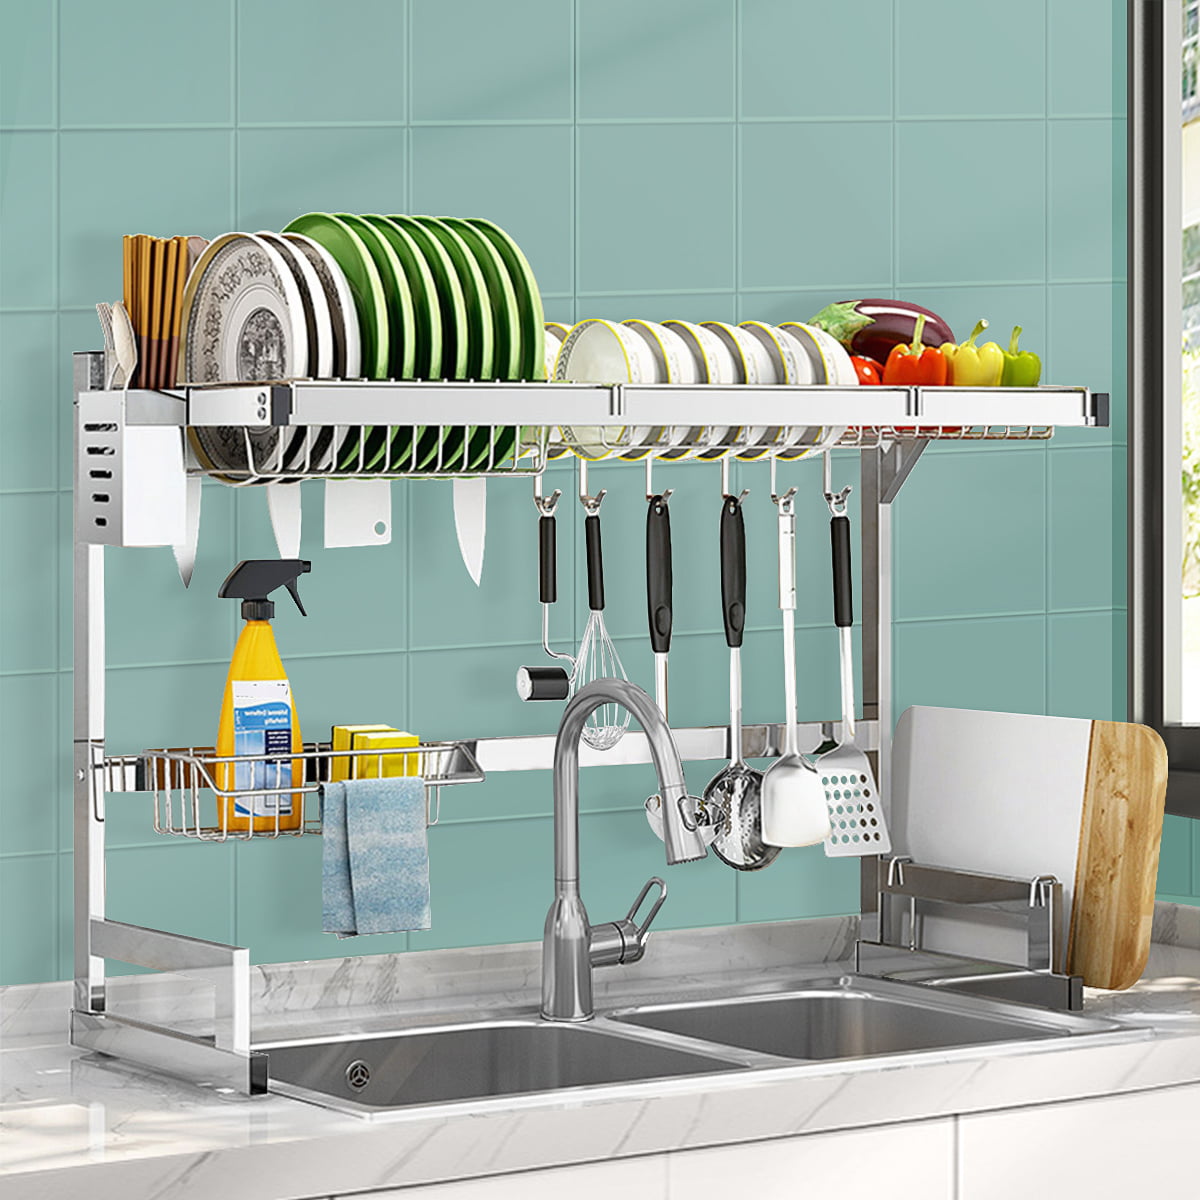 Over the Sink Dish Rack 2 Tier Dish Drying Rack 33x12x19 inches Large Dish  Drainer For Kitchen Sink Stainless Steel 